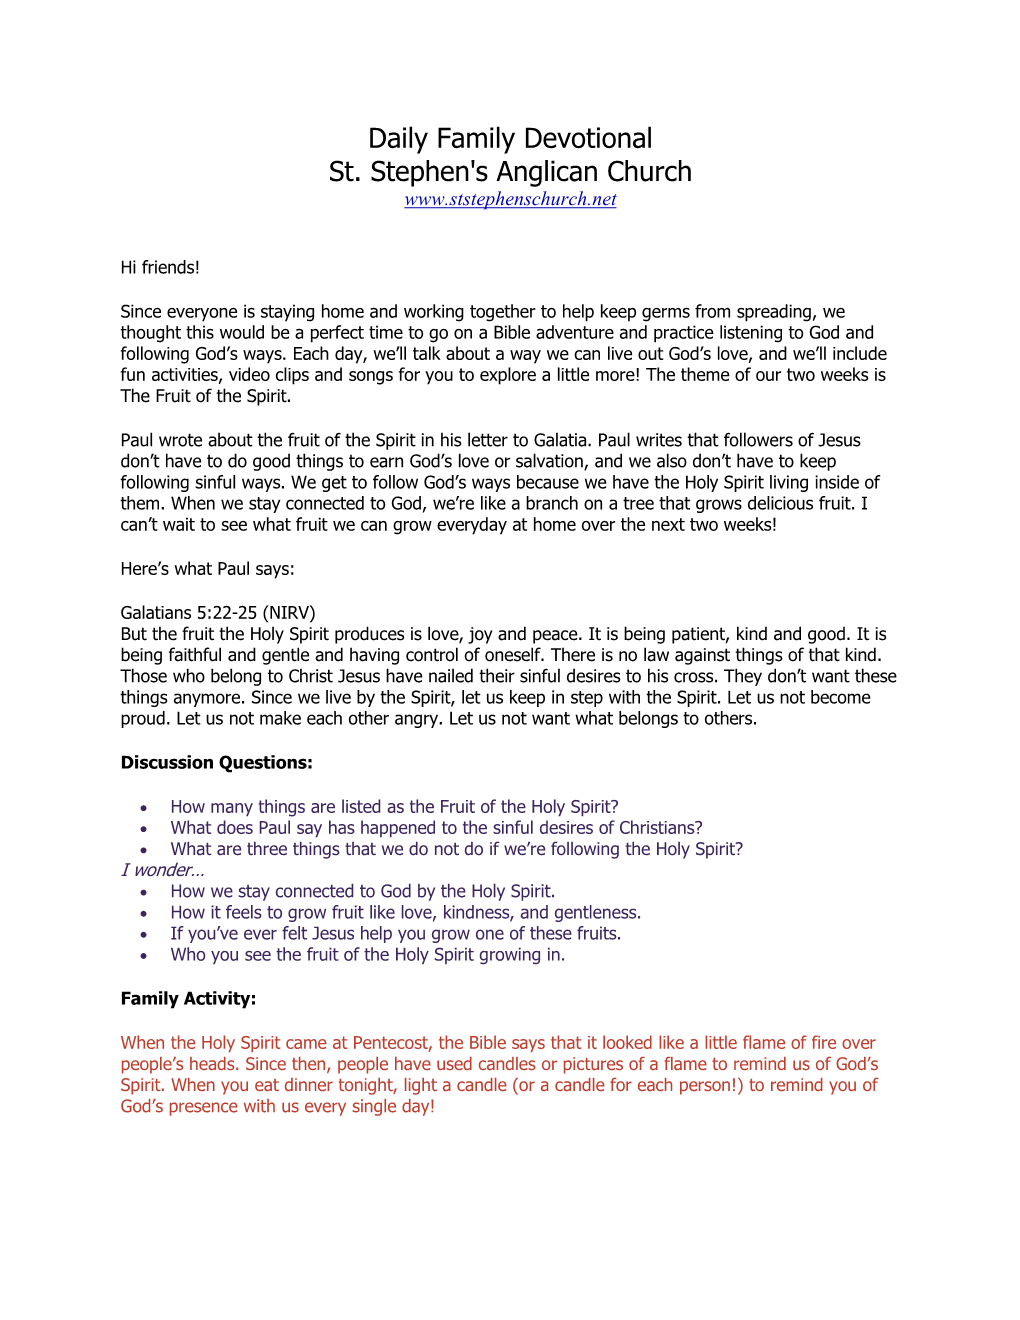 Daily Family Devotional St. Stephen's Anglican Church